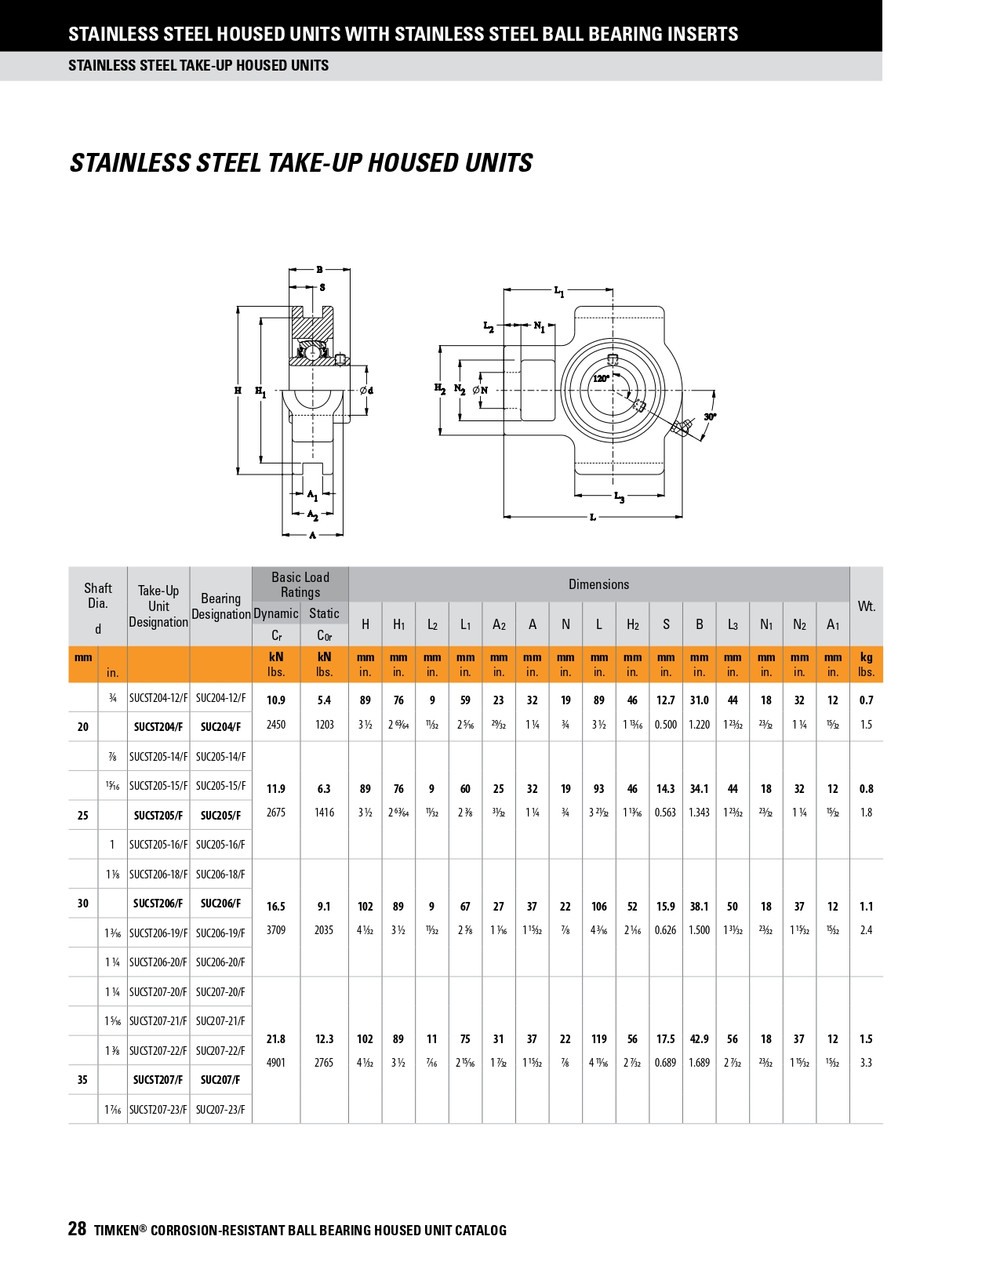 35mm Stainless Set Screw Take-Up Unit Assembly   SUCST207/F